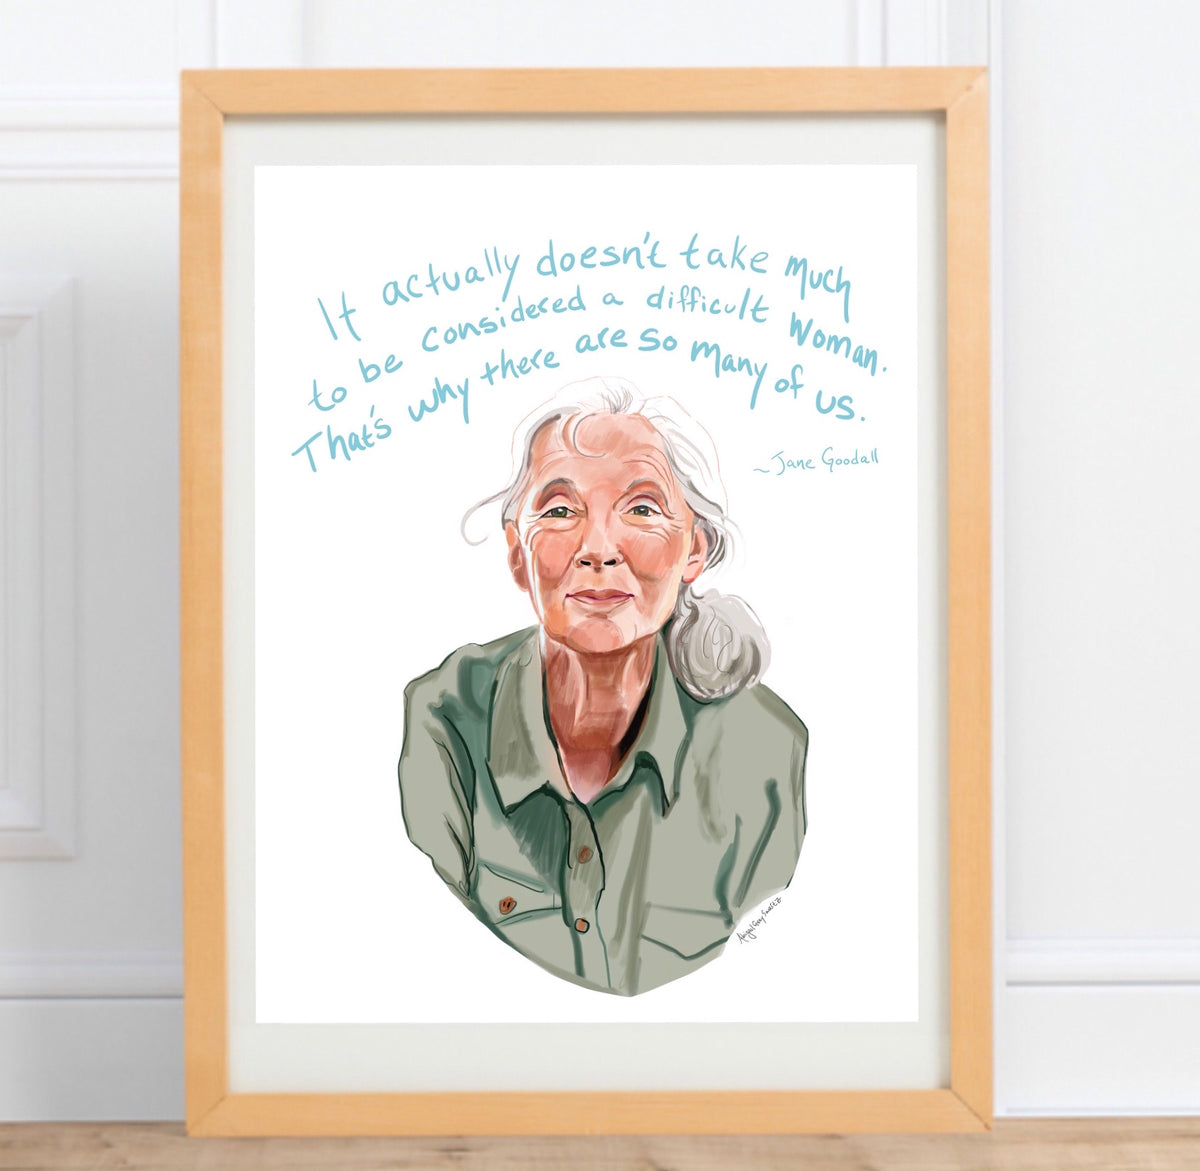 Jane Goodall Portrait and inspiring quote || Difficult woman quote -- Print